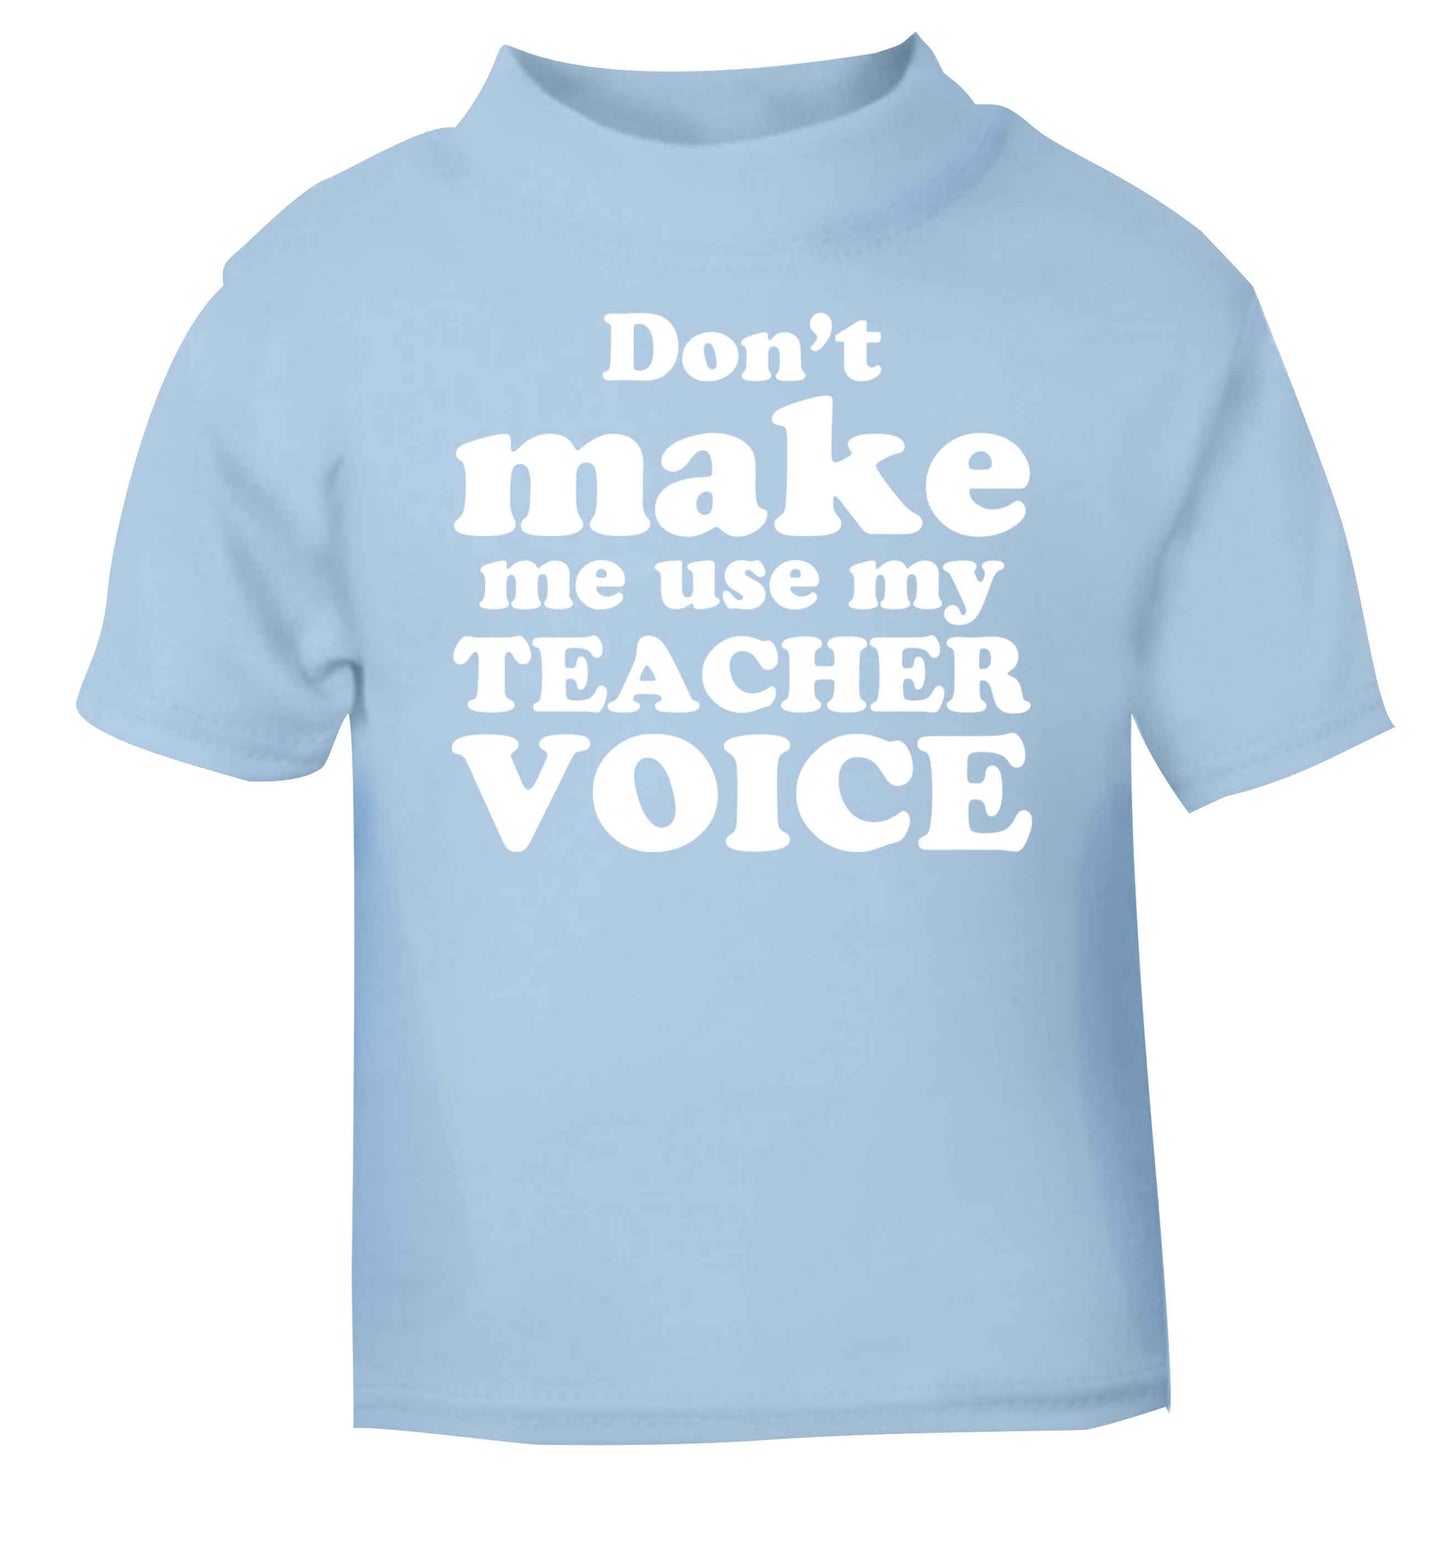 Don't make me use my teacher voice light blue baby toddler Tshirt 2 Years